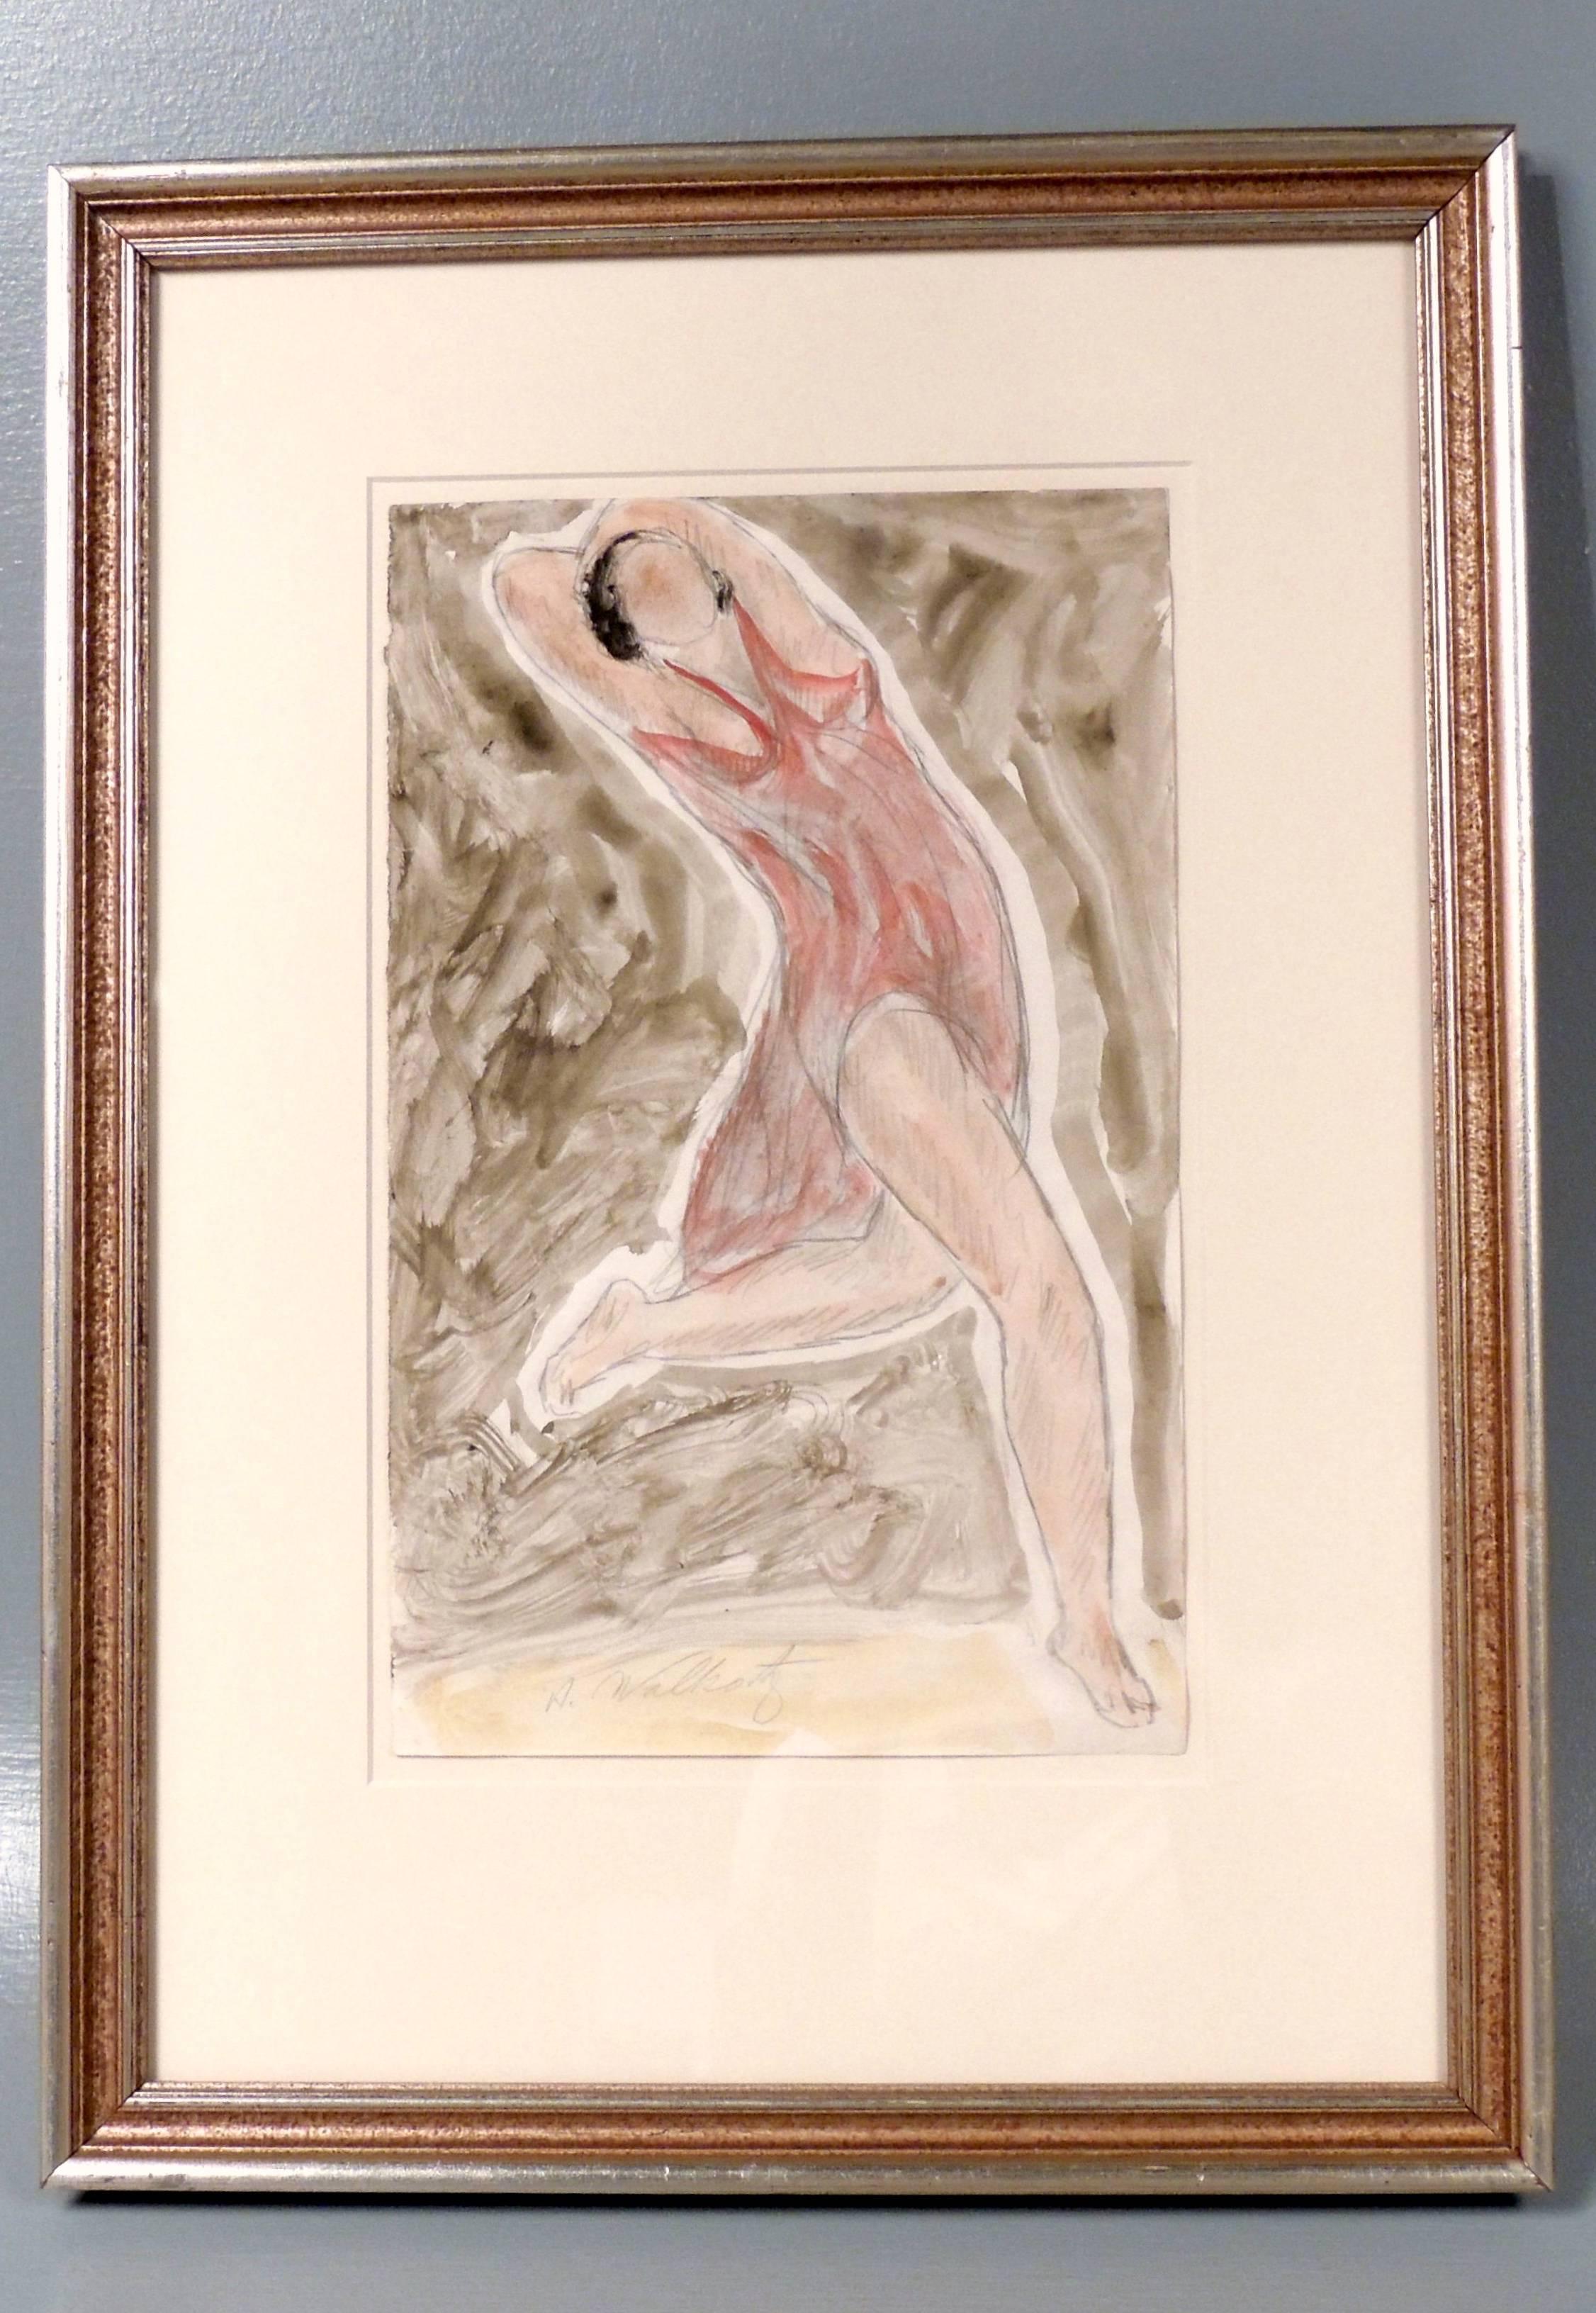 Paper Modernist Watercolored Drawing of Dancer Isadora Duncan, by Abraham Walkowitz